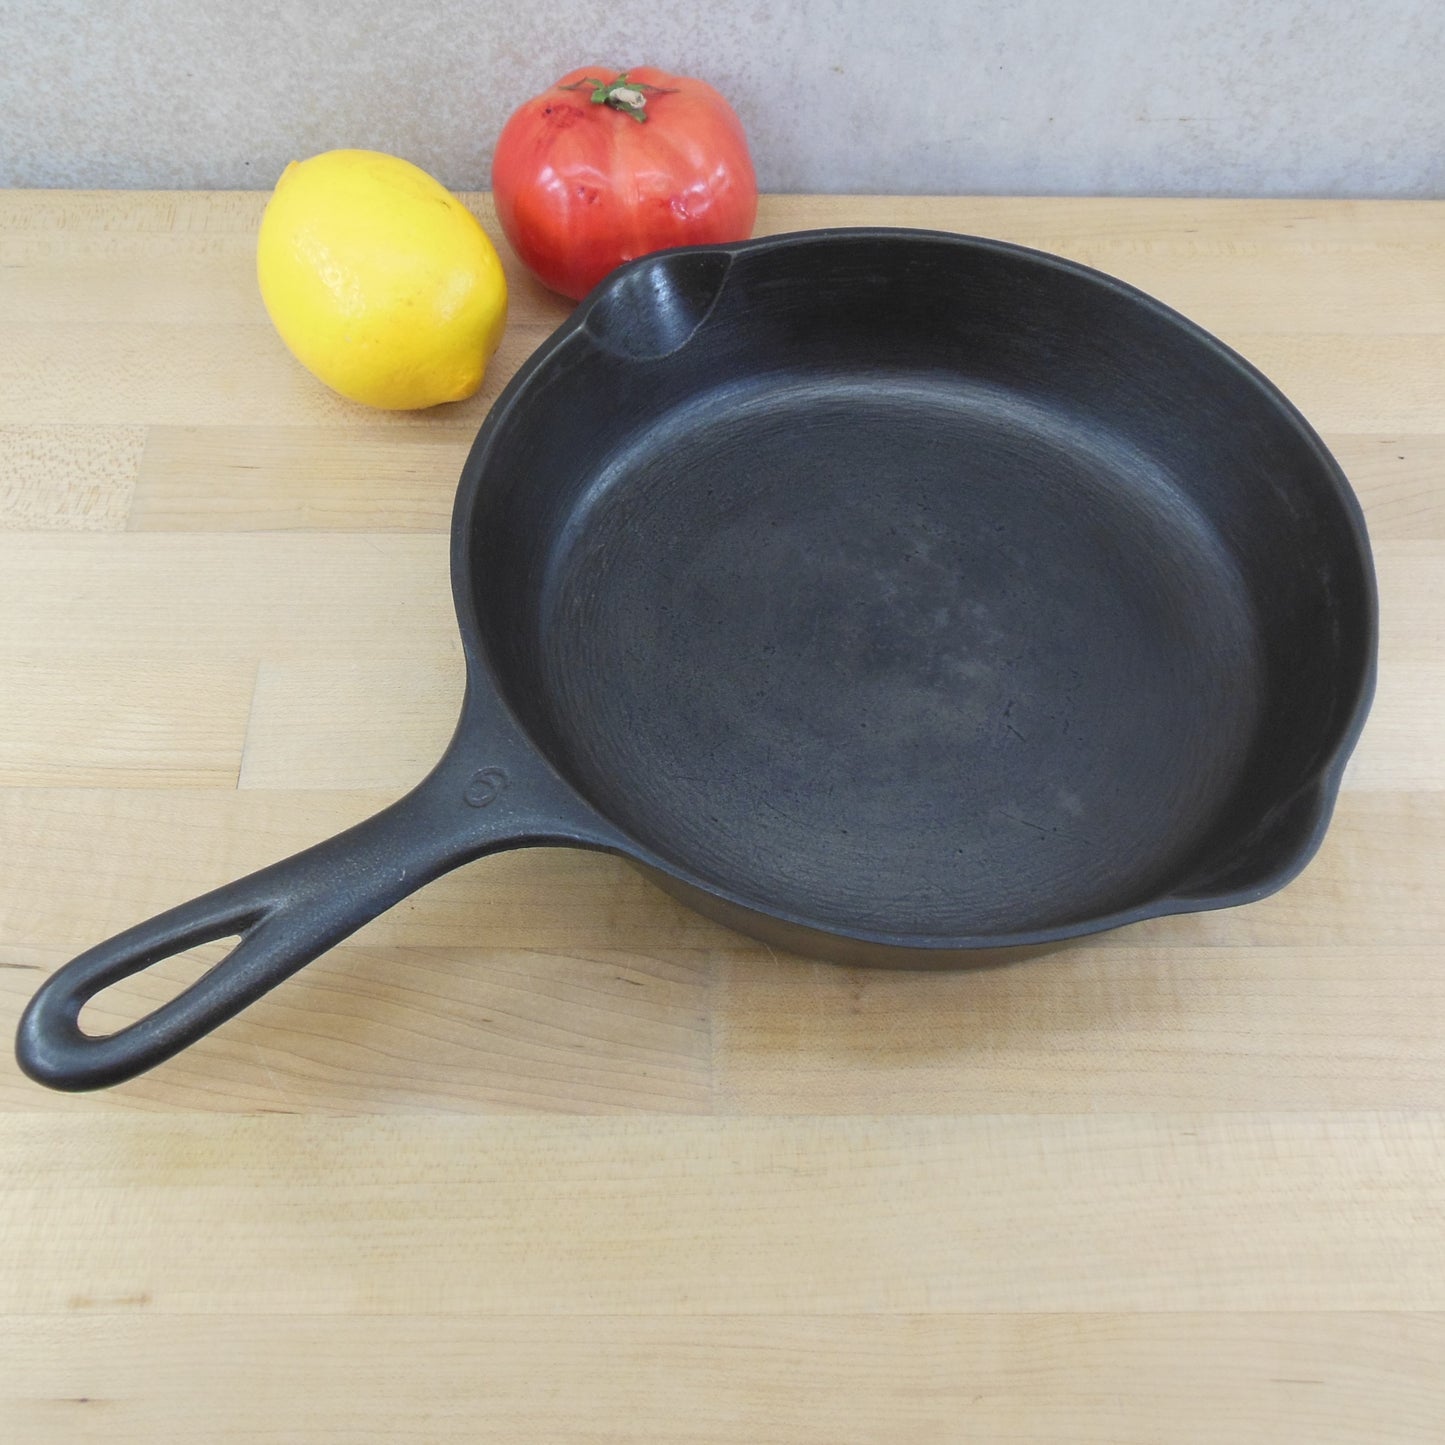 Wagner Ware Sidney O #6 Cast Iron Skillet 1056 H